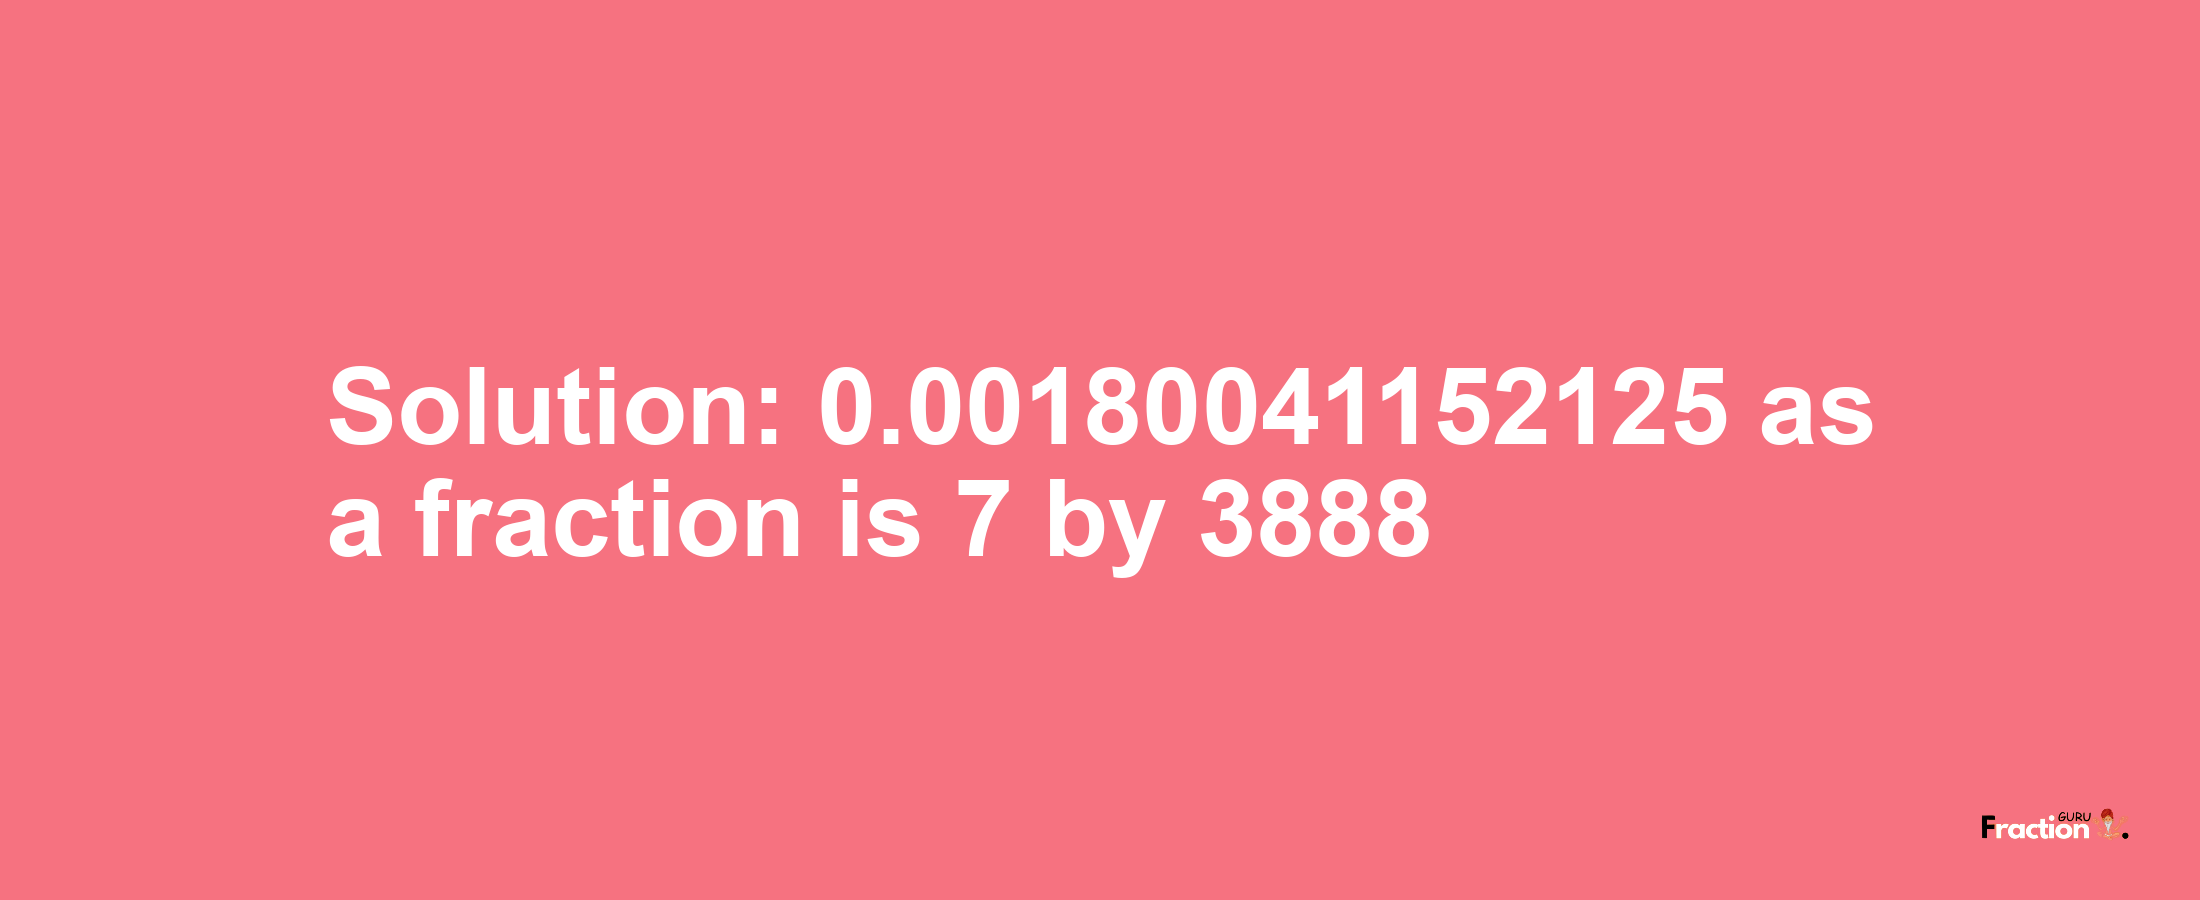 Solution:0.00180041152125 as a fraction is 7/3888